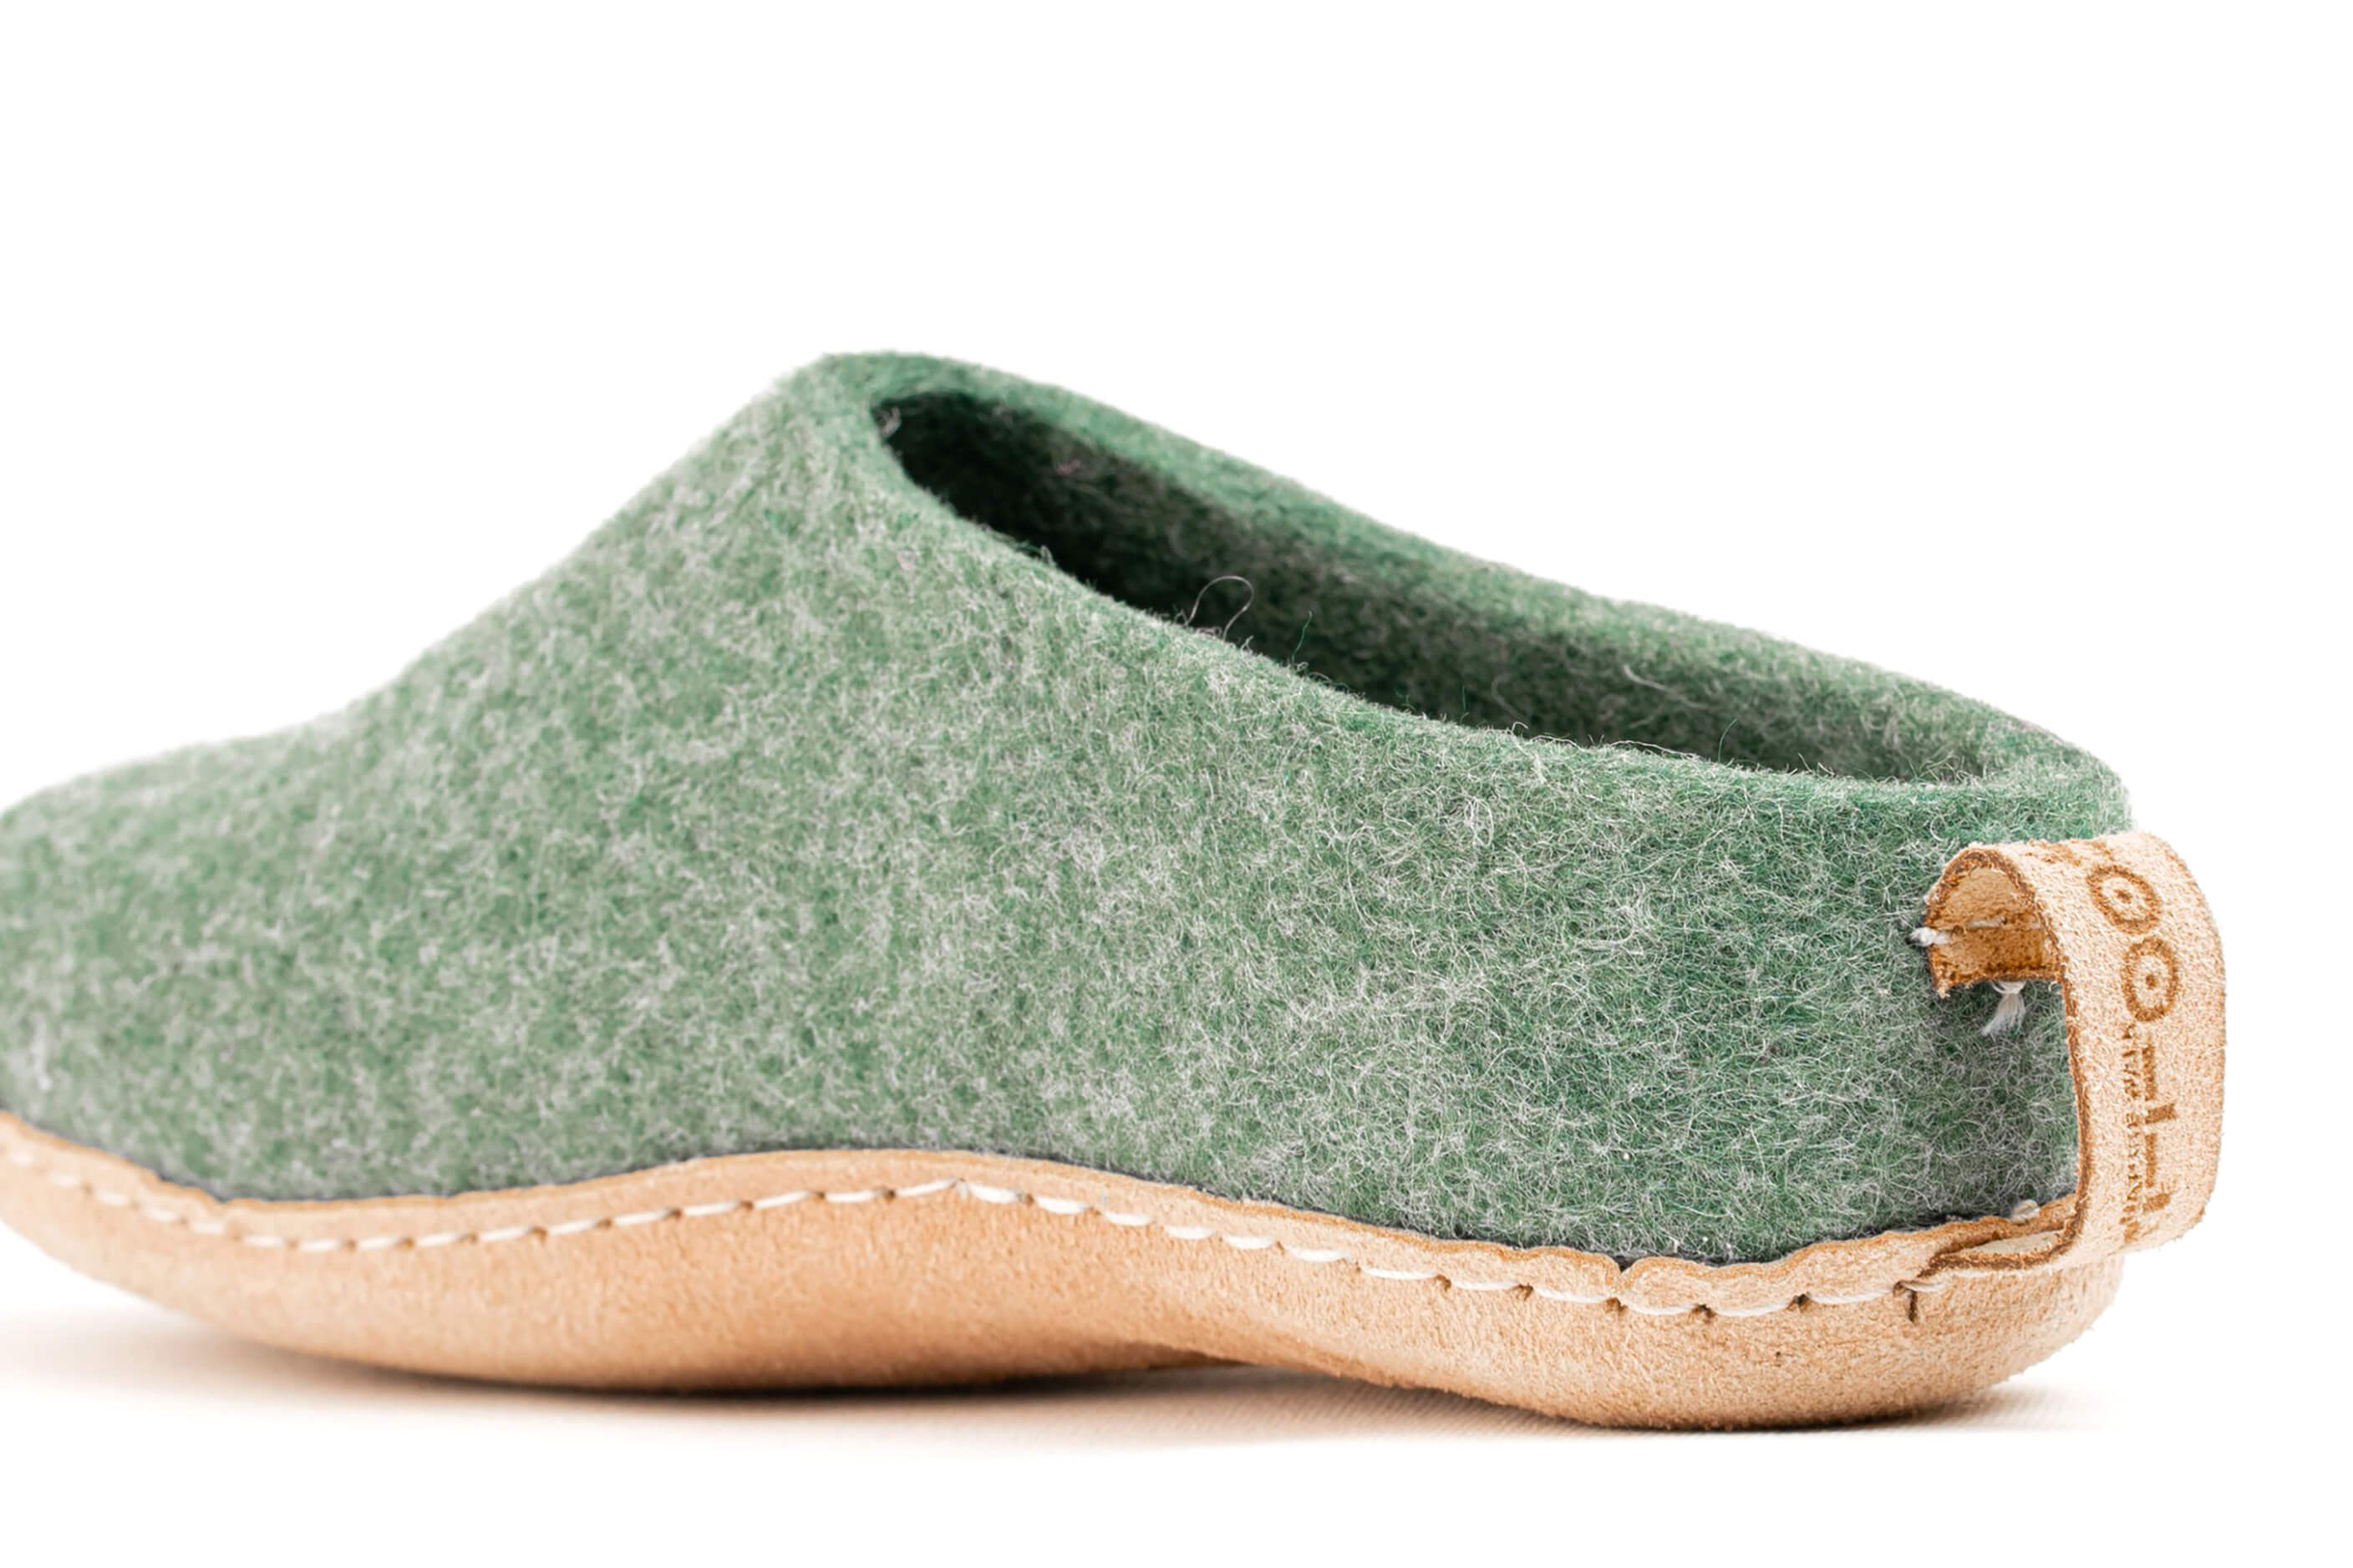 Indoor Open Heel Slippers With Leather Sole - Jungle Green